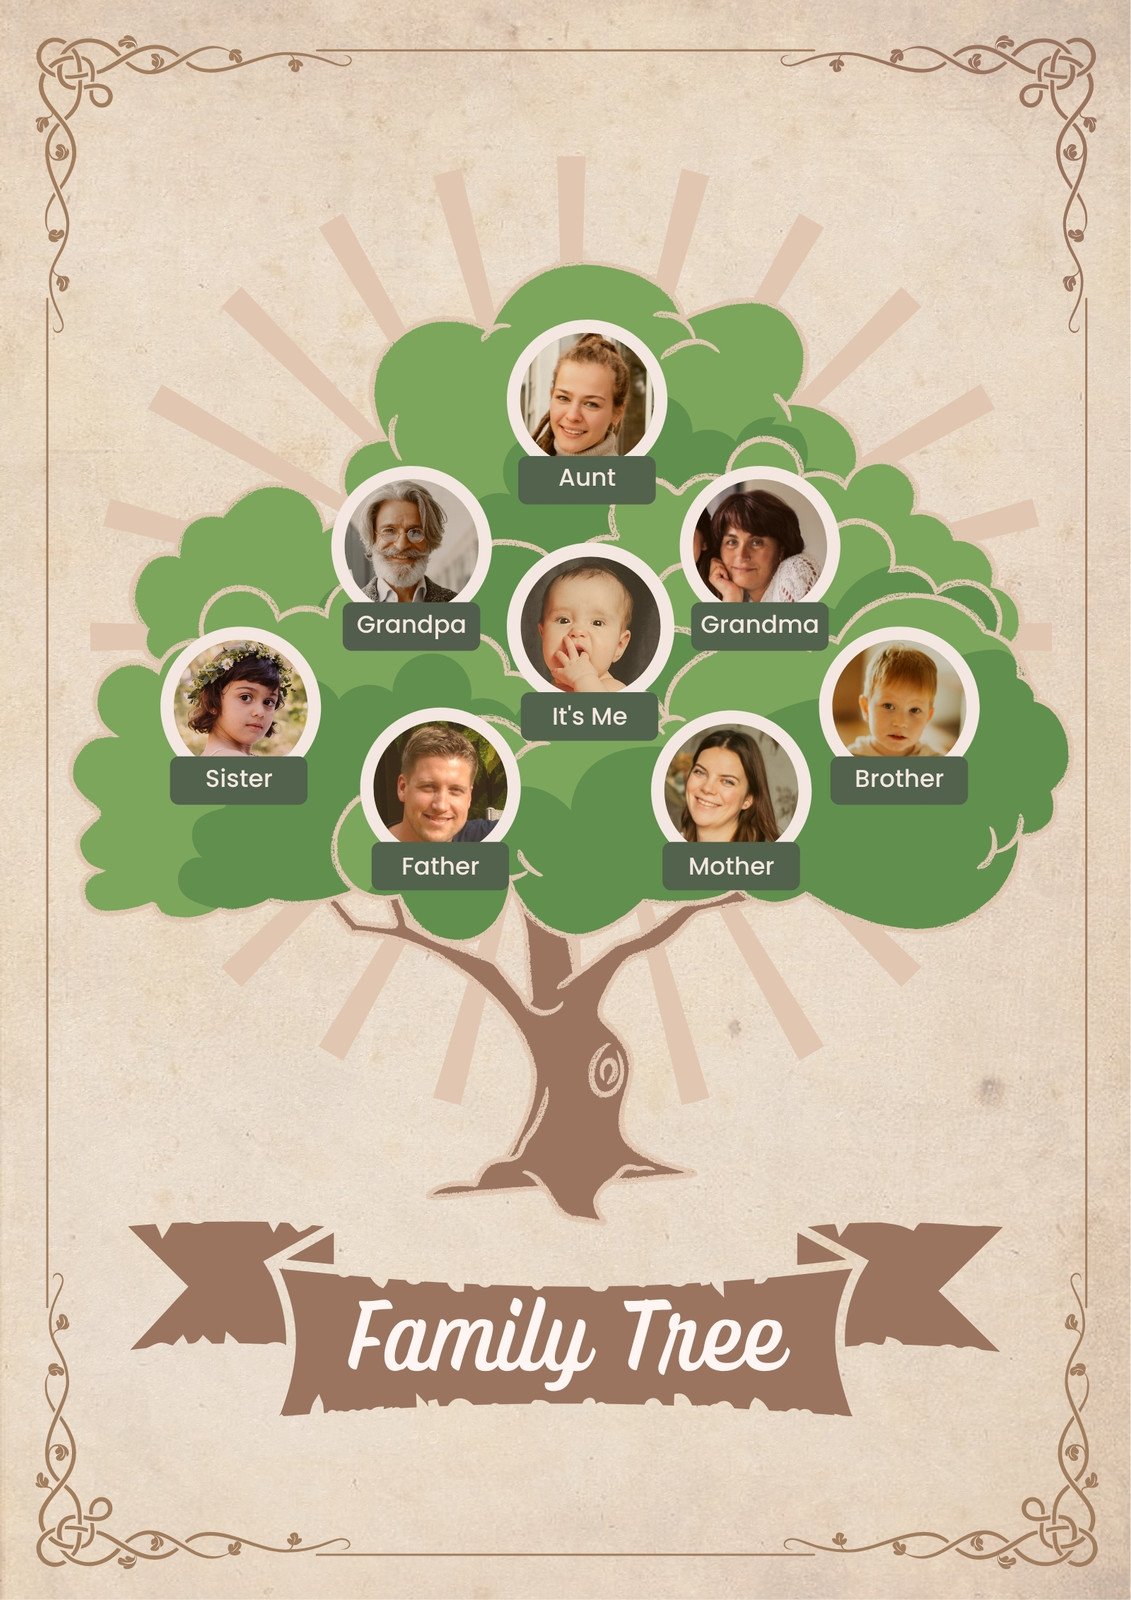 Free printable family tree chart. Four generations on one A4 landscape  sheet of paper.